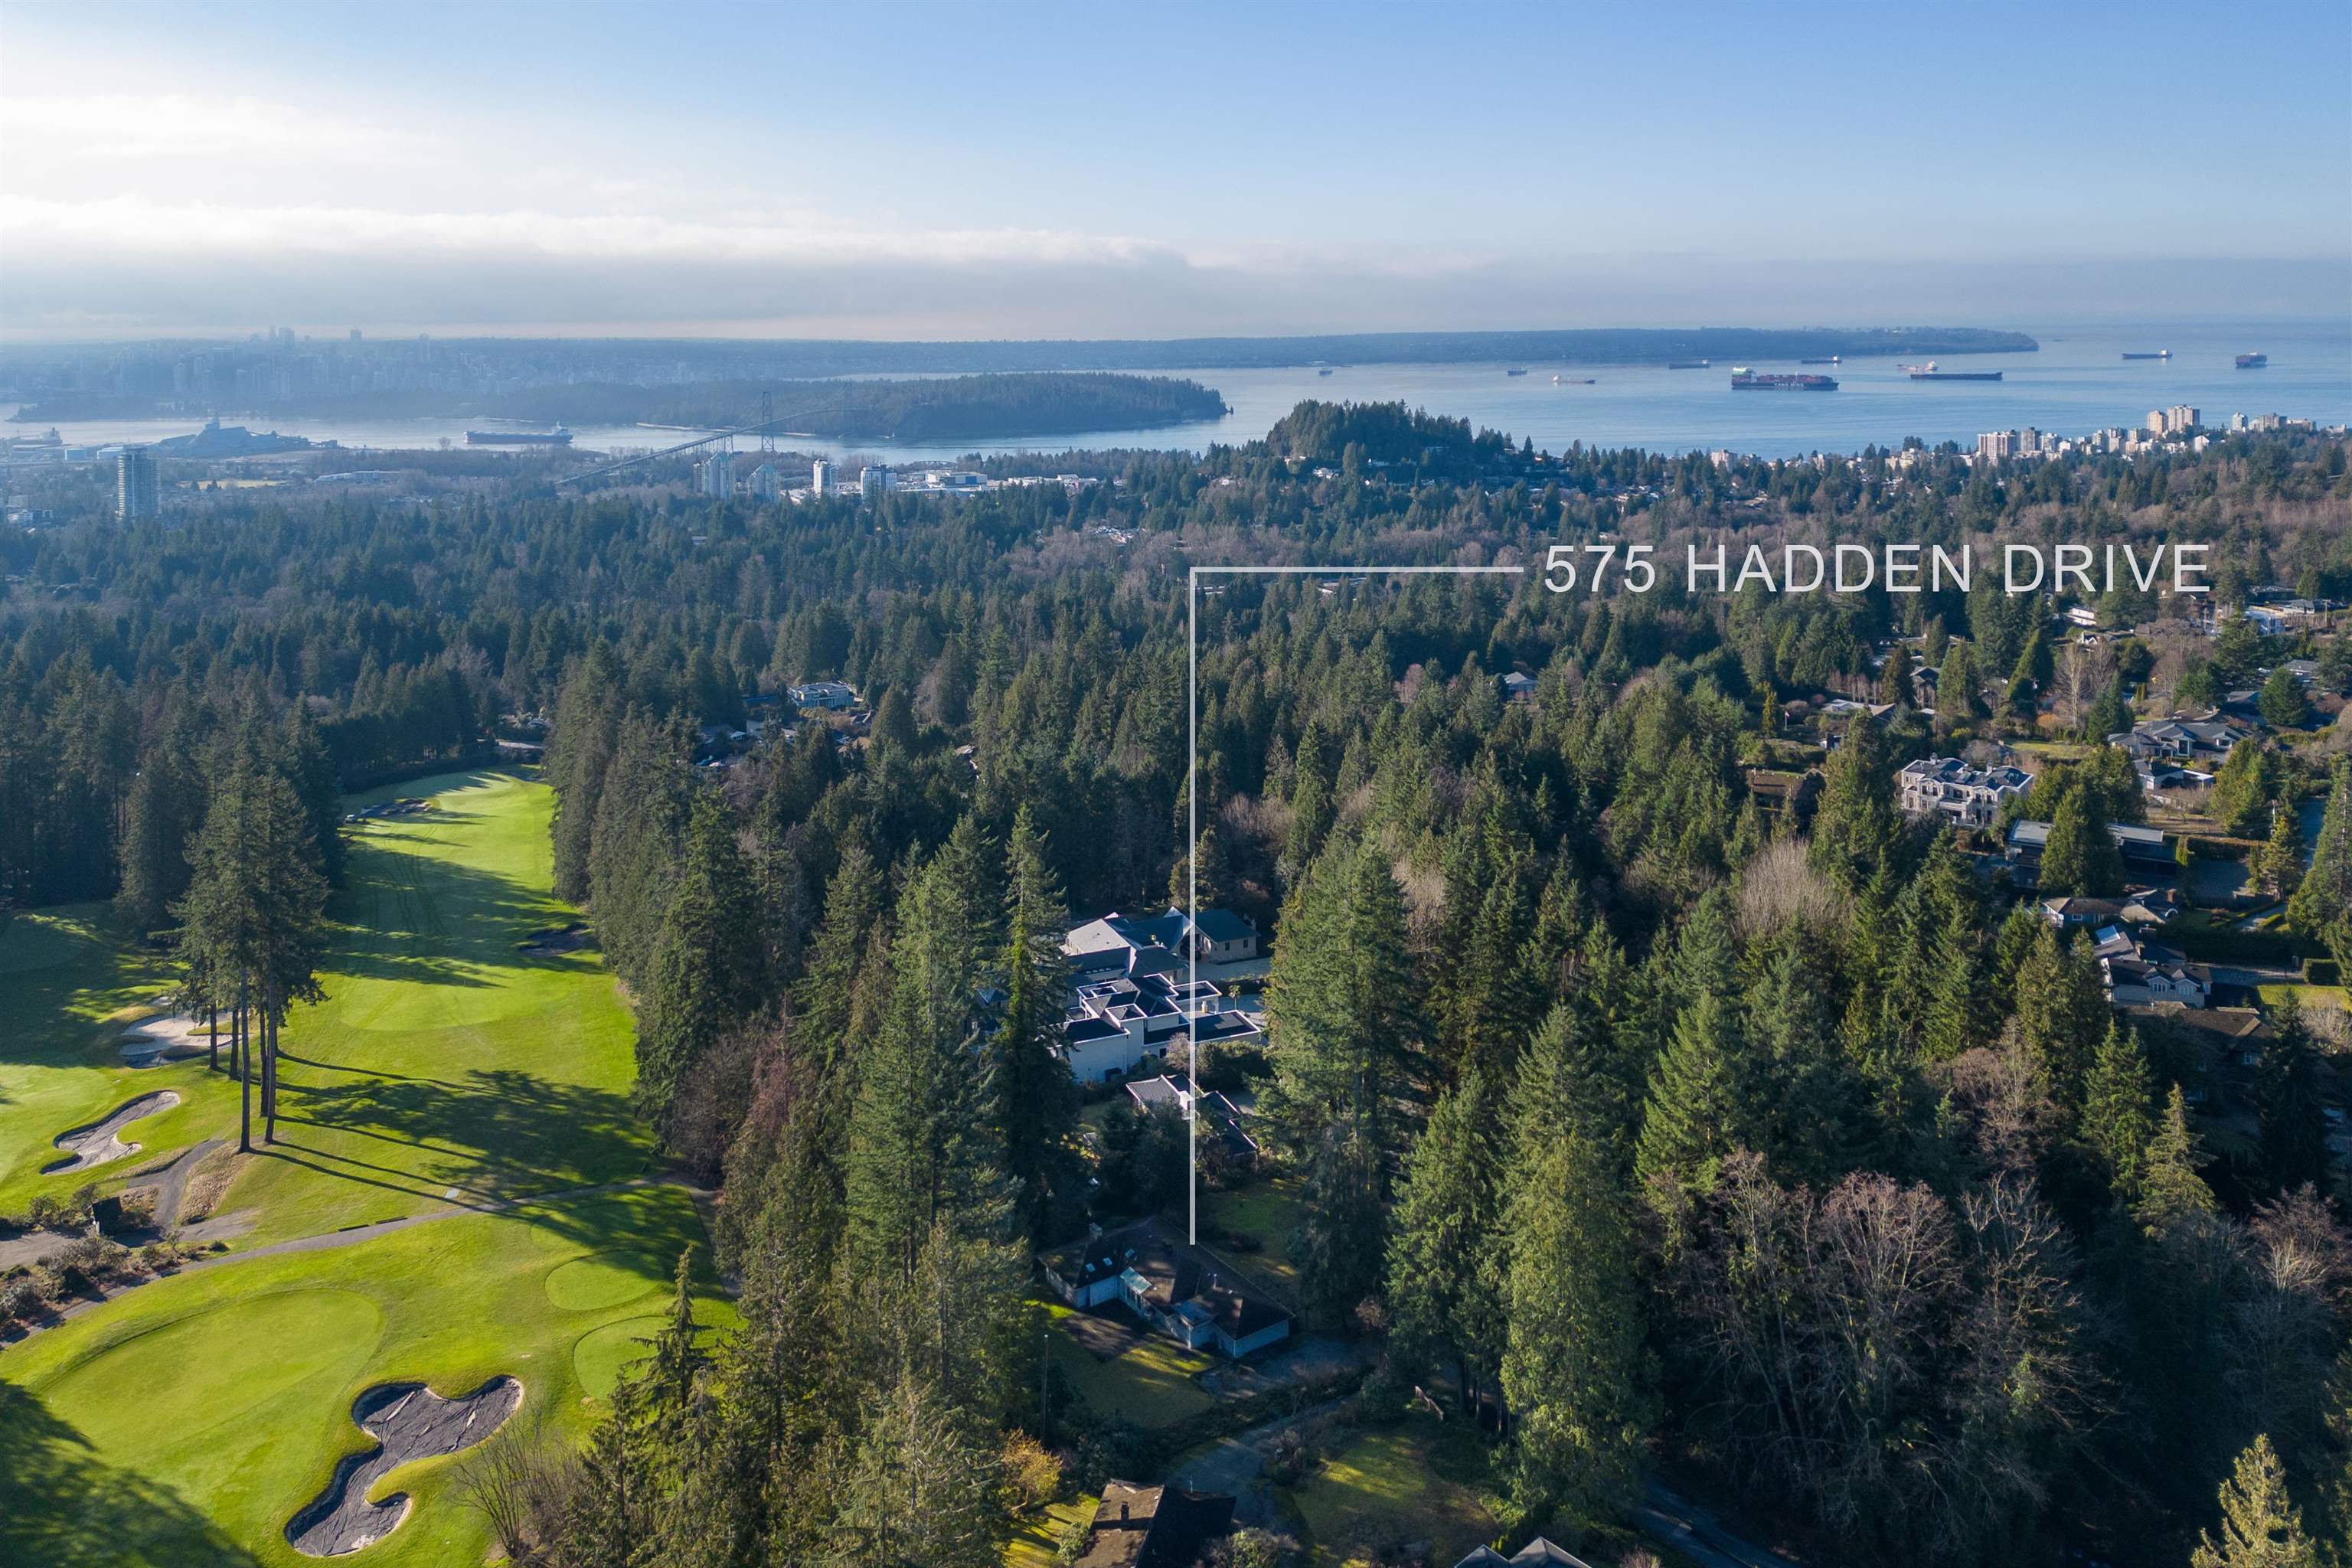 Listing image of 575 HADDEN DRIVE